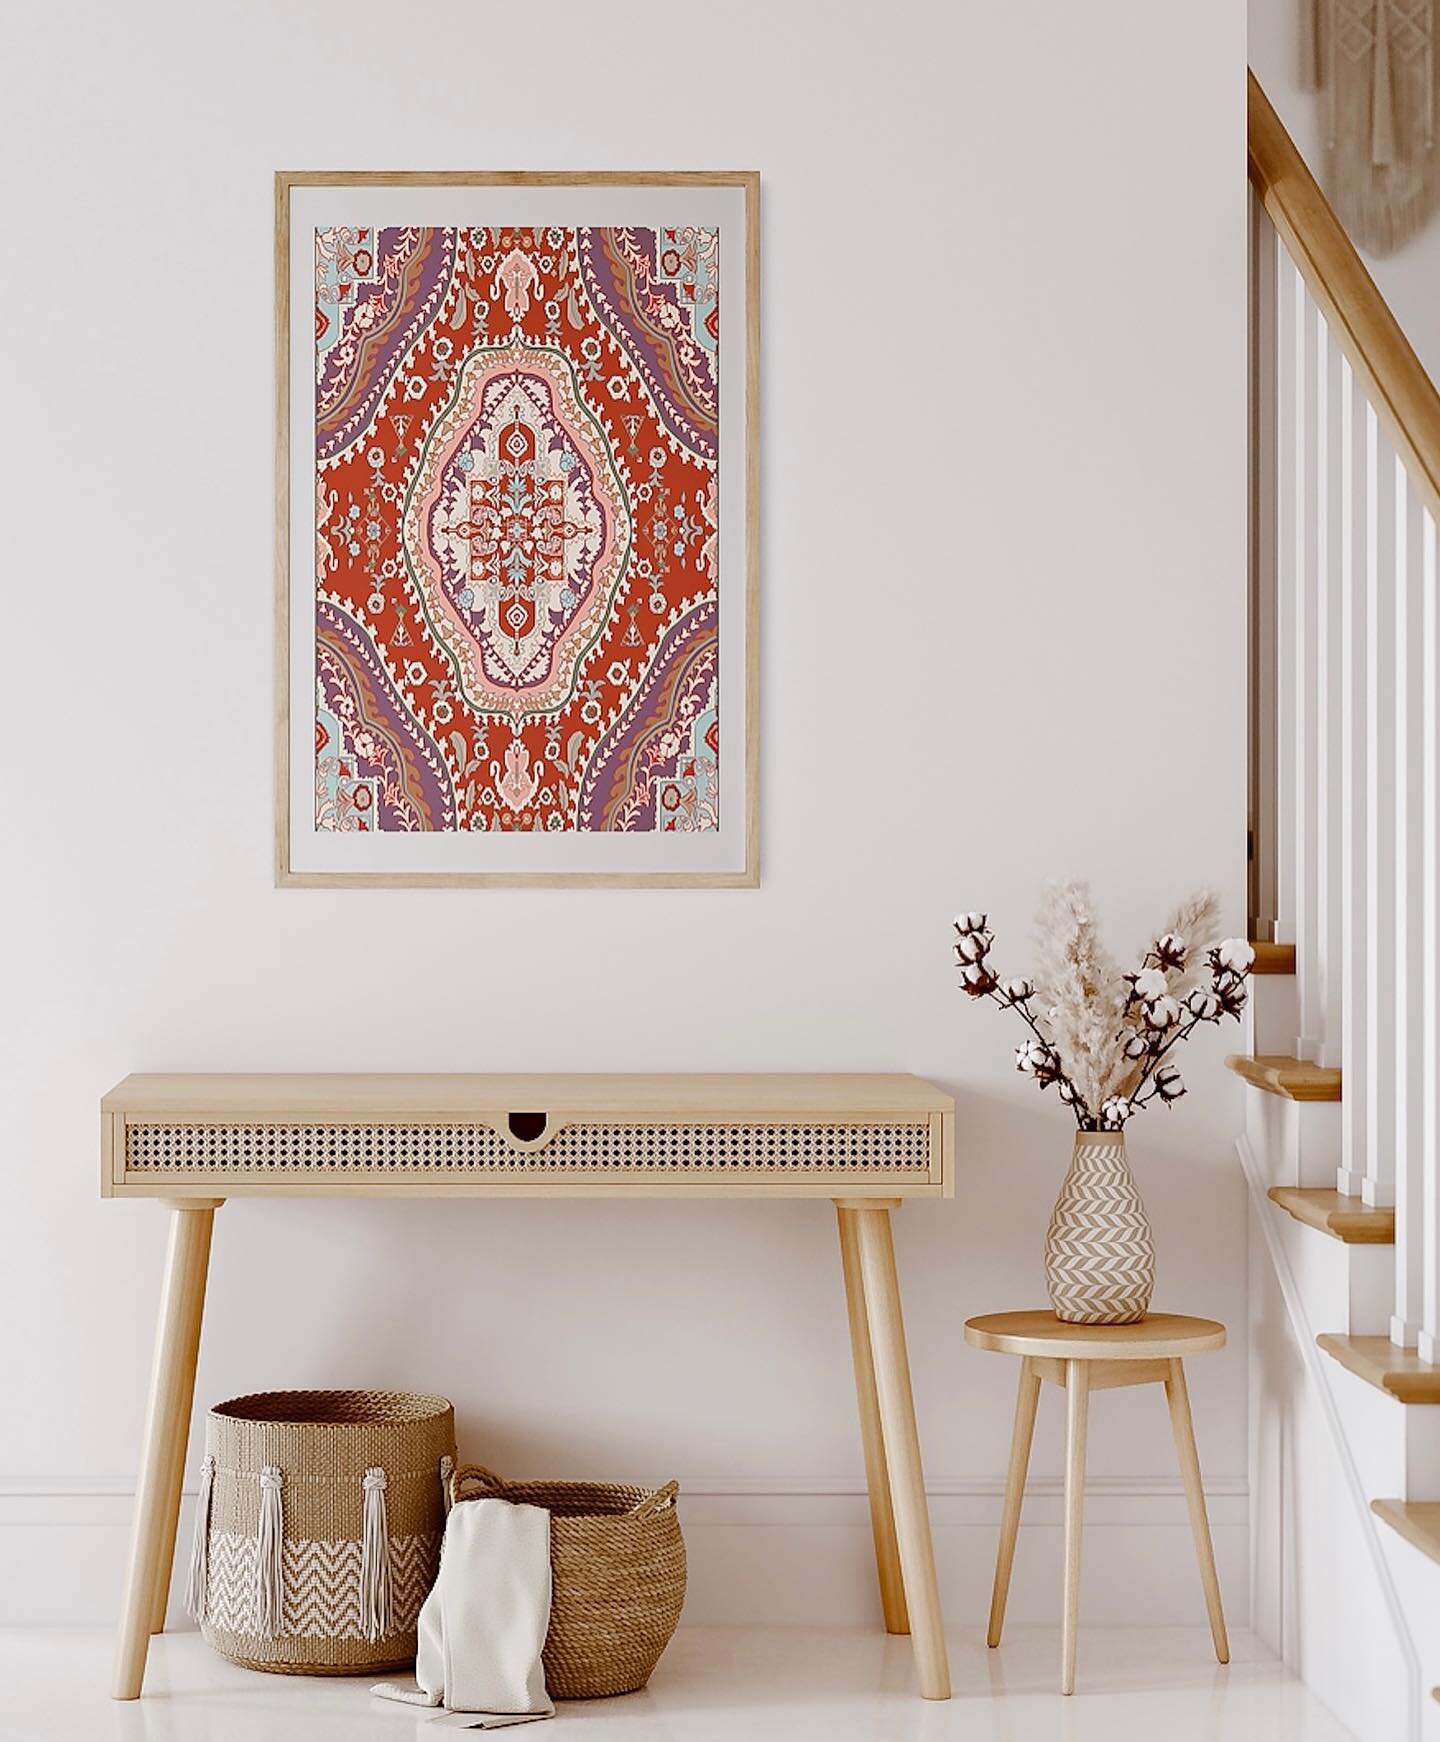 ✨ Sneak peek✨ of what&rsquo;s coming to @chehrazstudio October 1st: hanging linen rug designs! These hand drawn and colored pieces are taken and printed on fabric, cut and put into a beautiful frame to add texture to your art collection. These pieces